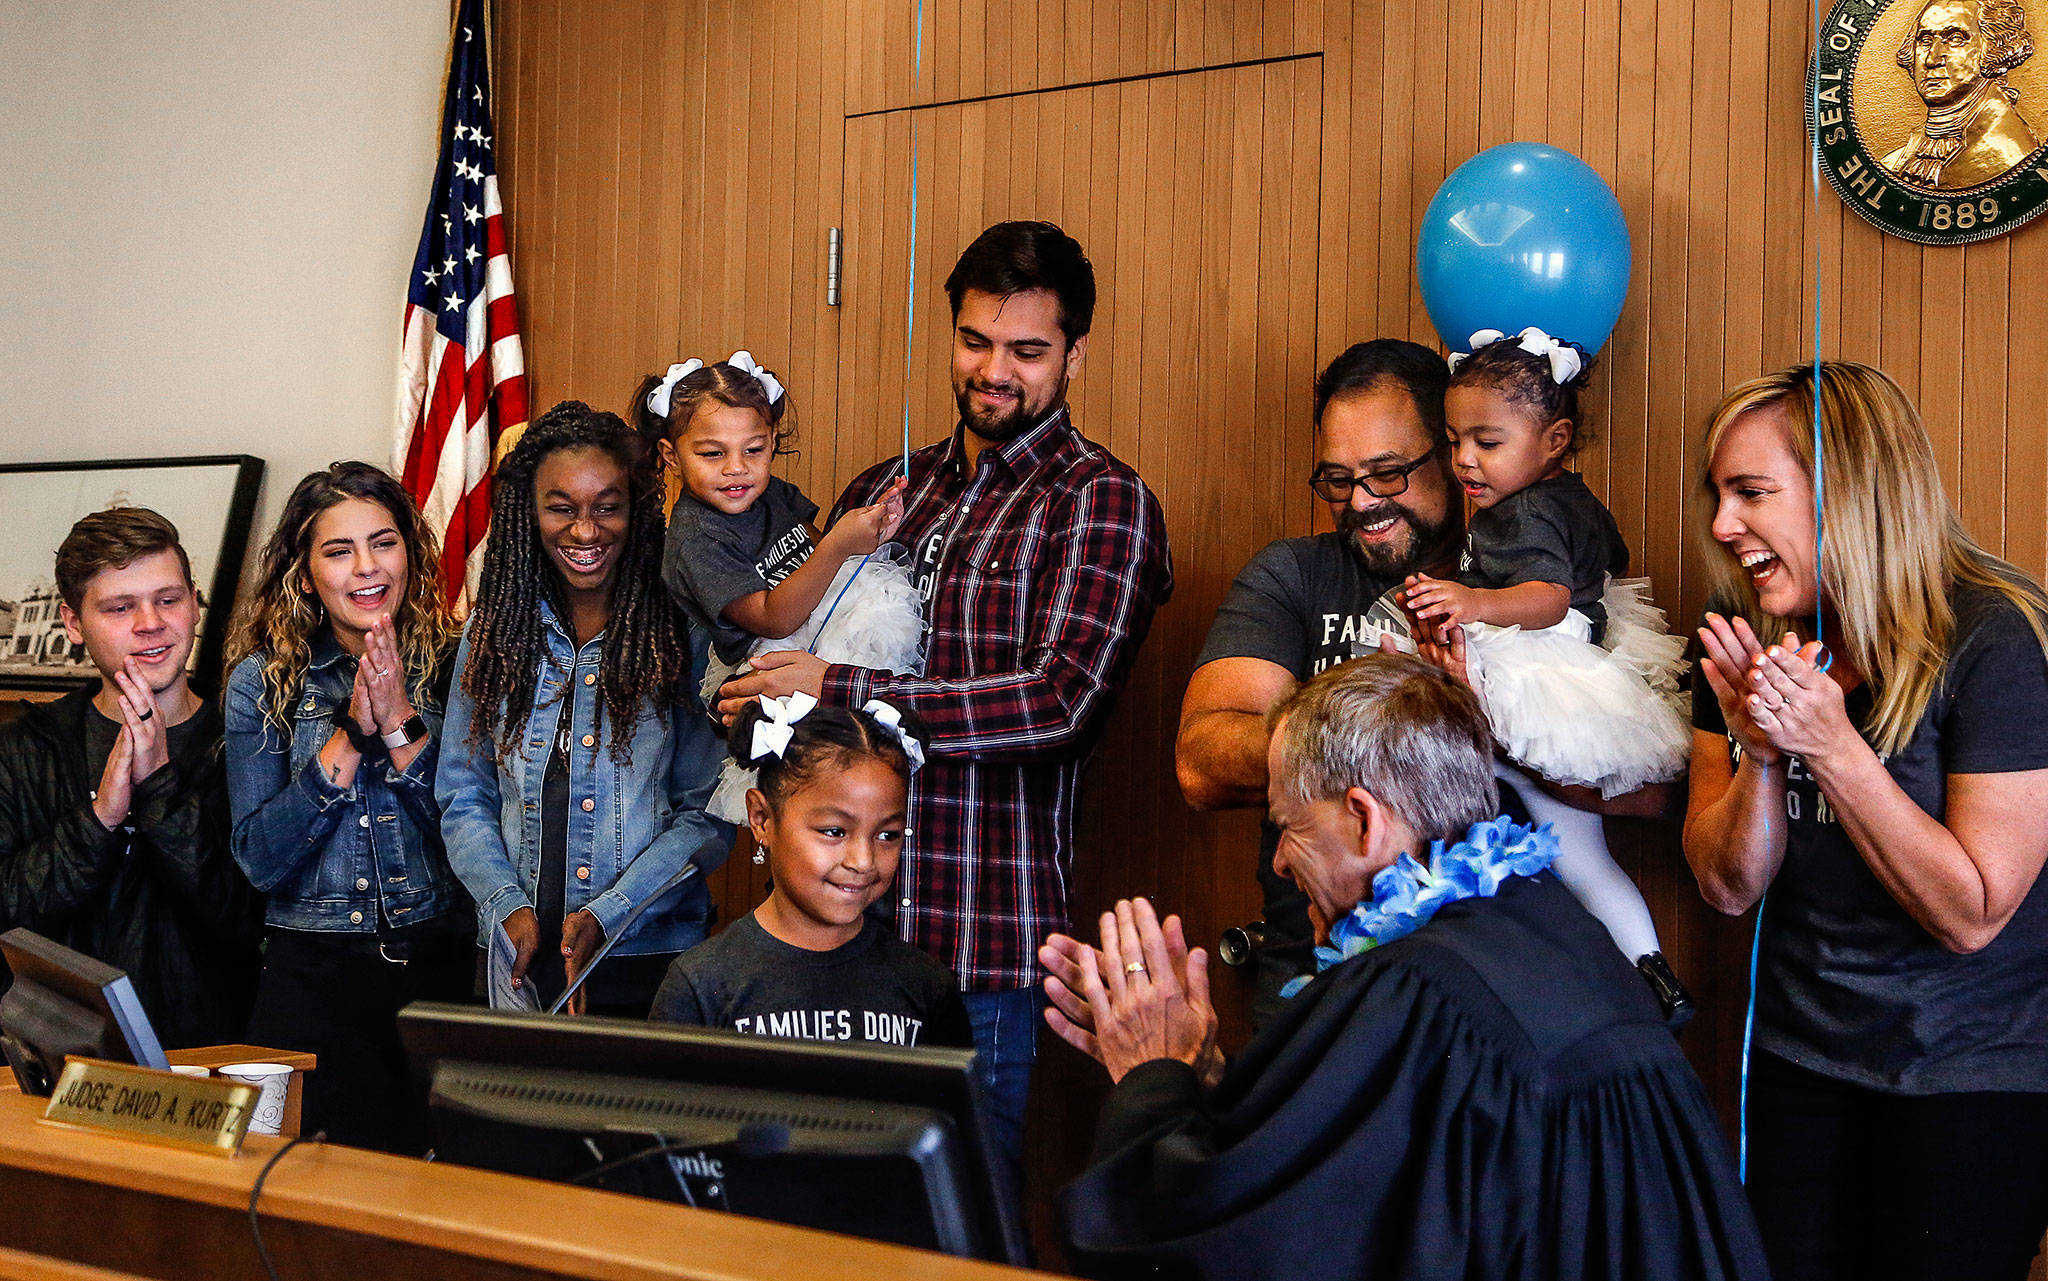 Arlington’s Avellaneda family join Judge David Kurtz at his bench as Mayah, 6, strikes his gavel Friday, National Adoption Day. Mayah and her two younger sisters, Alayna, 2, and Malaya, 1, were adopted by Jen (right) and Cid Avellaneda (next to Jen). Other family members are (from left) the Avellanedas’ son-in-law, Blake King, their daughter, Mariah King, their other adopted daughter, Nicole, 13, and their son, Jeriah Avellaneda, 26, holding Alayna. (Dan Bates / The Herald)